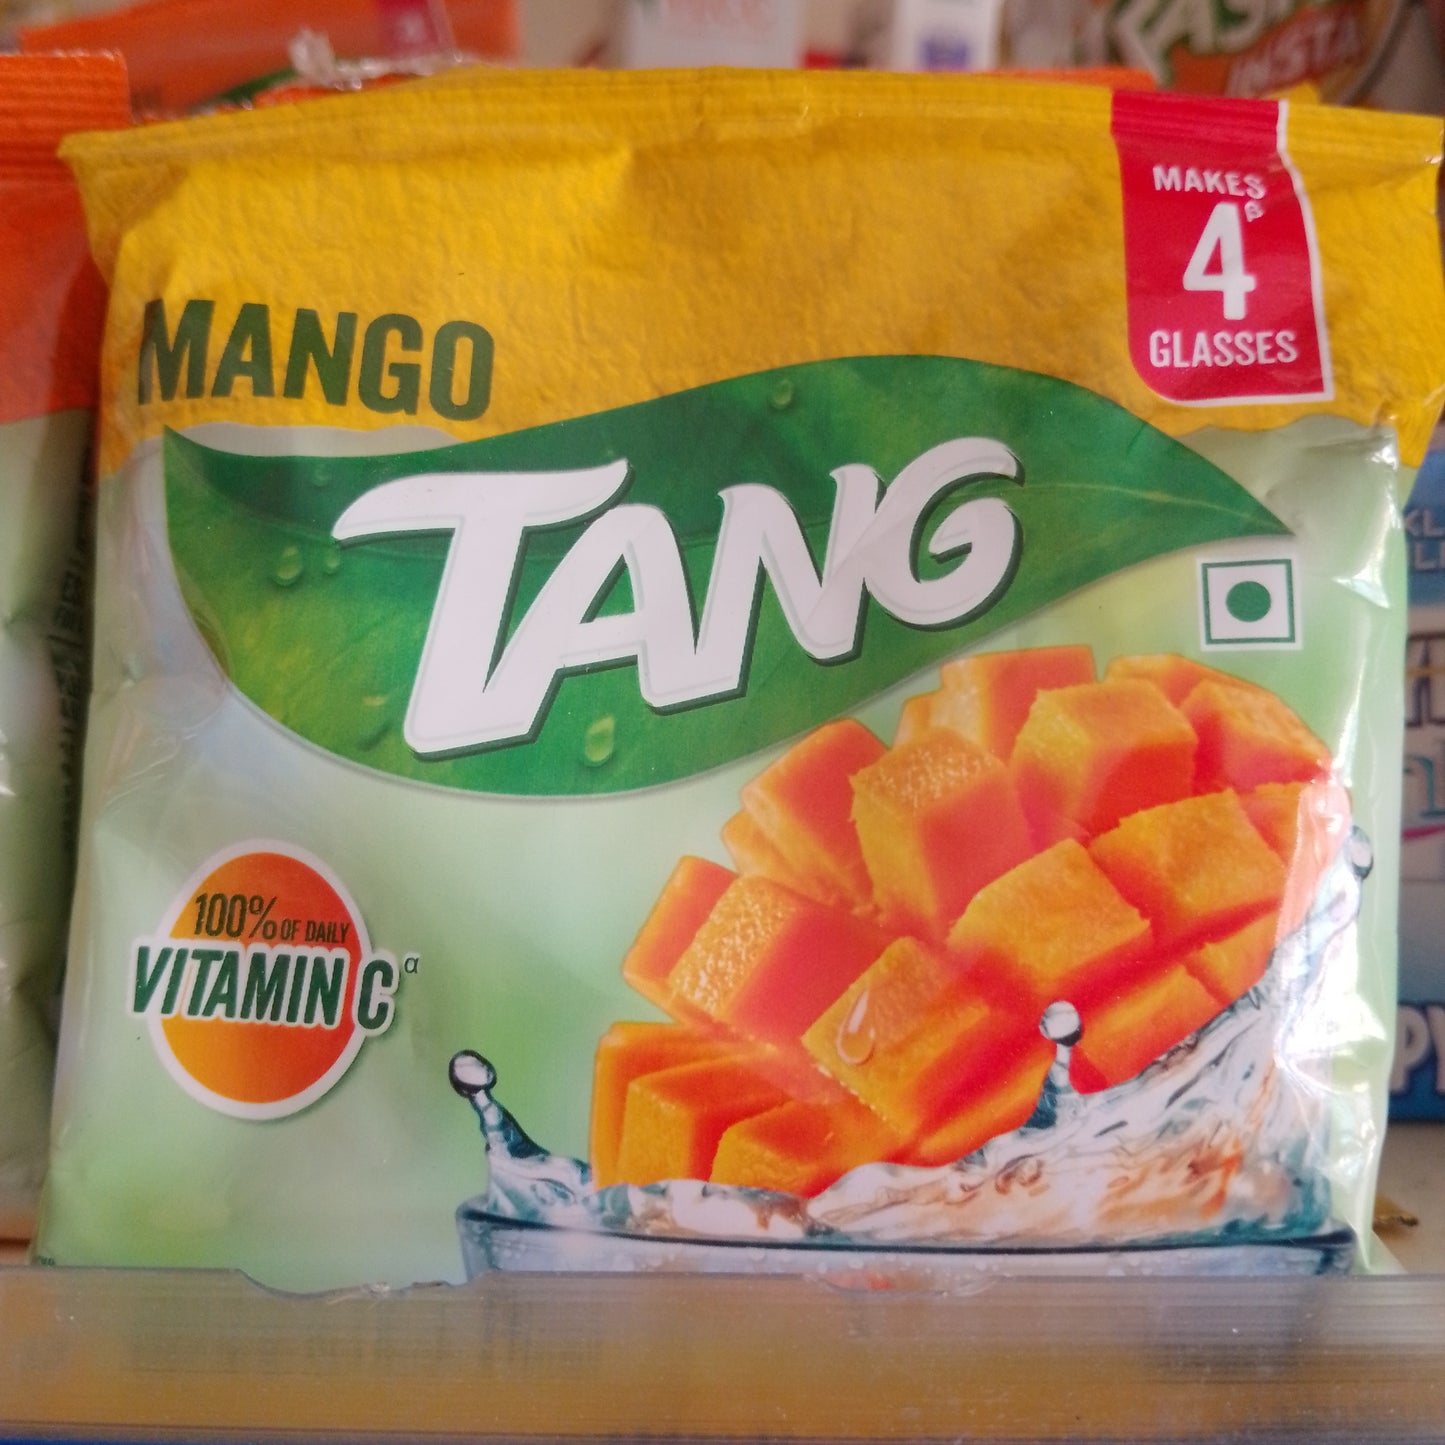 Mango Tang instant Drink